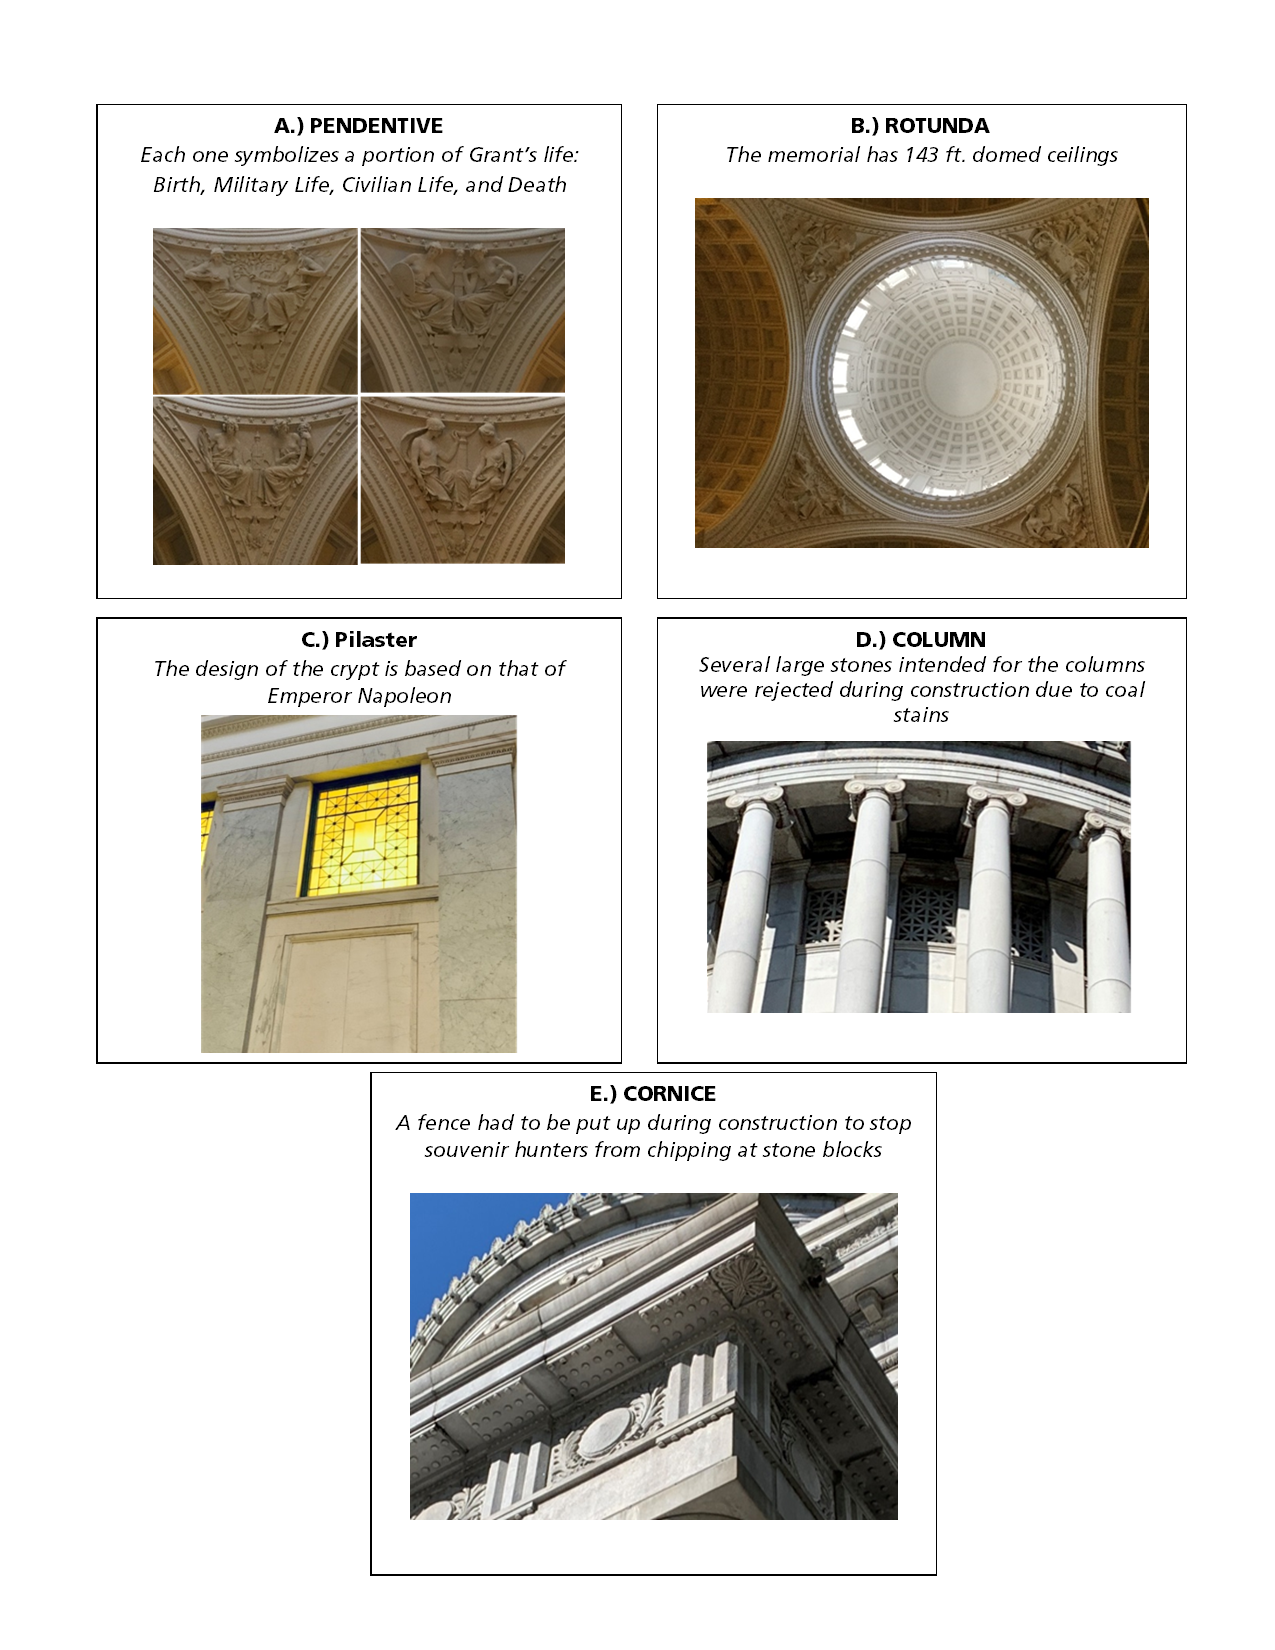 5 images of architectural elements in white with corresponding facts in black text above each image